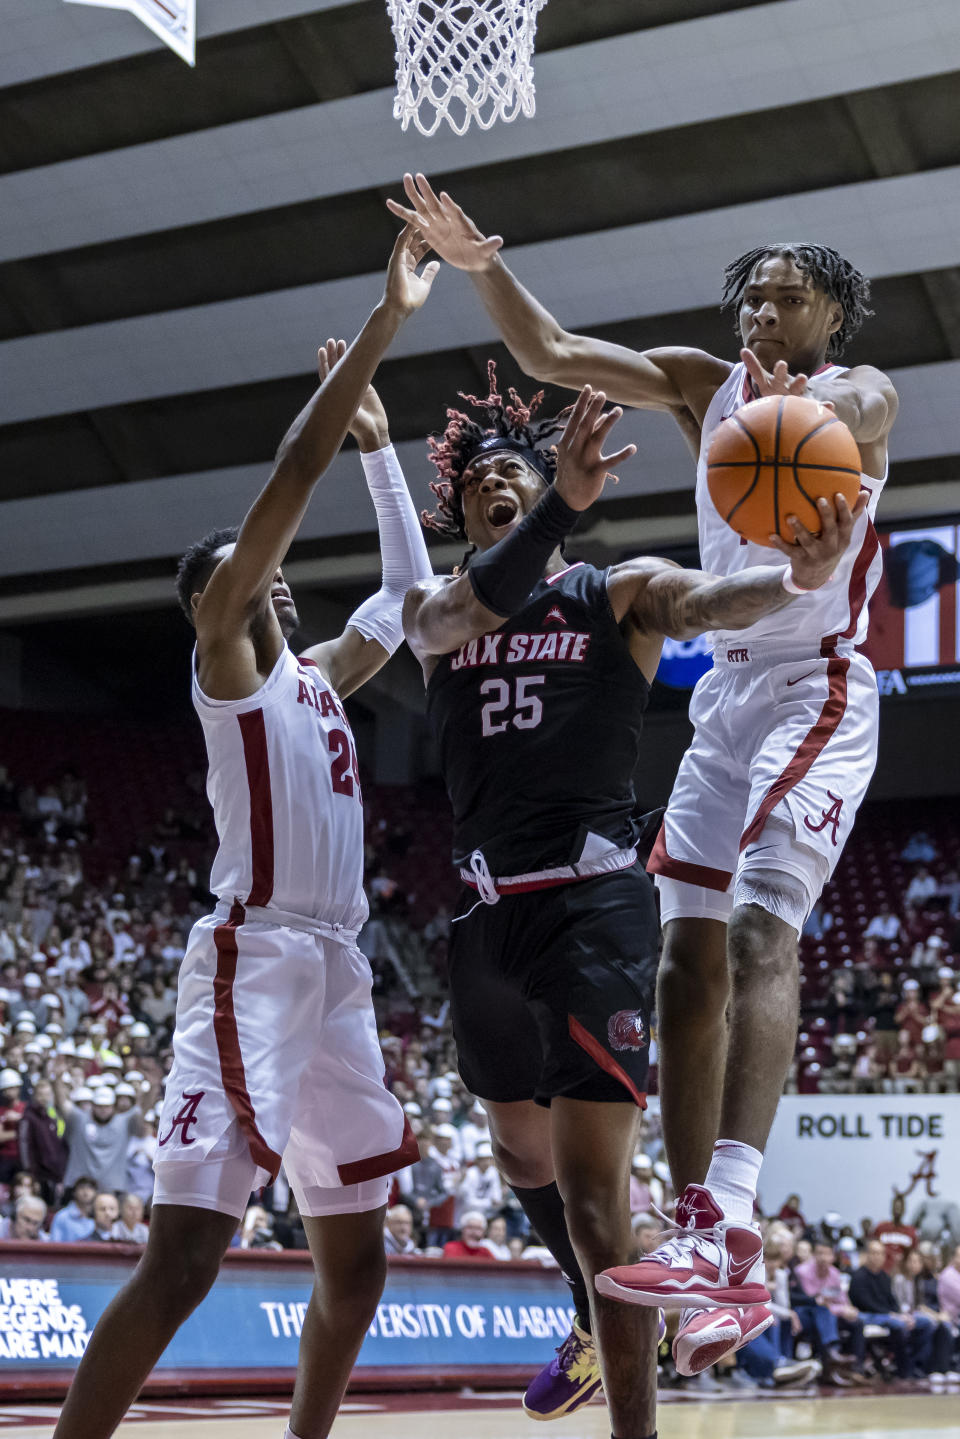 Alabama forward Brandon Miller, left, Jacksonville State forward Clarence "Monzy" Jackson (25) and Alabama forward Noah Clowney, right, chase a rebound during the first half of an NCAA college basketball game, Friday, Nov. 18, 2022, in Tuscaloosa, Ala. (AP Photo/Vasha Hunt)